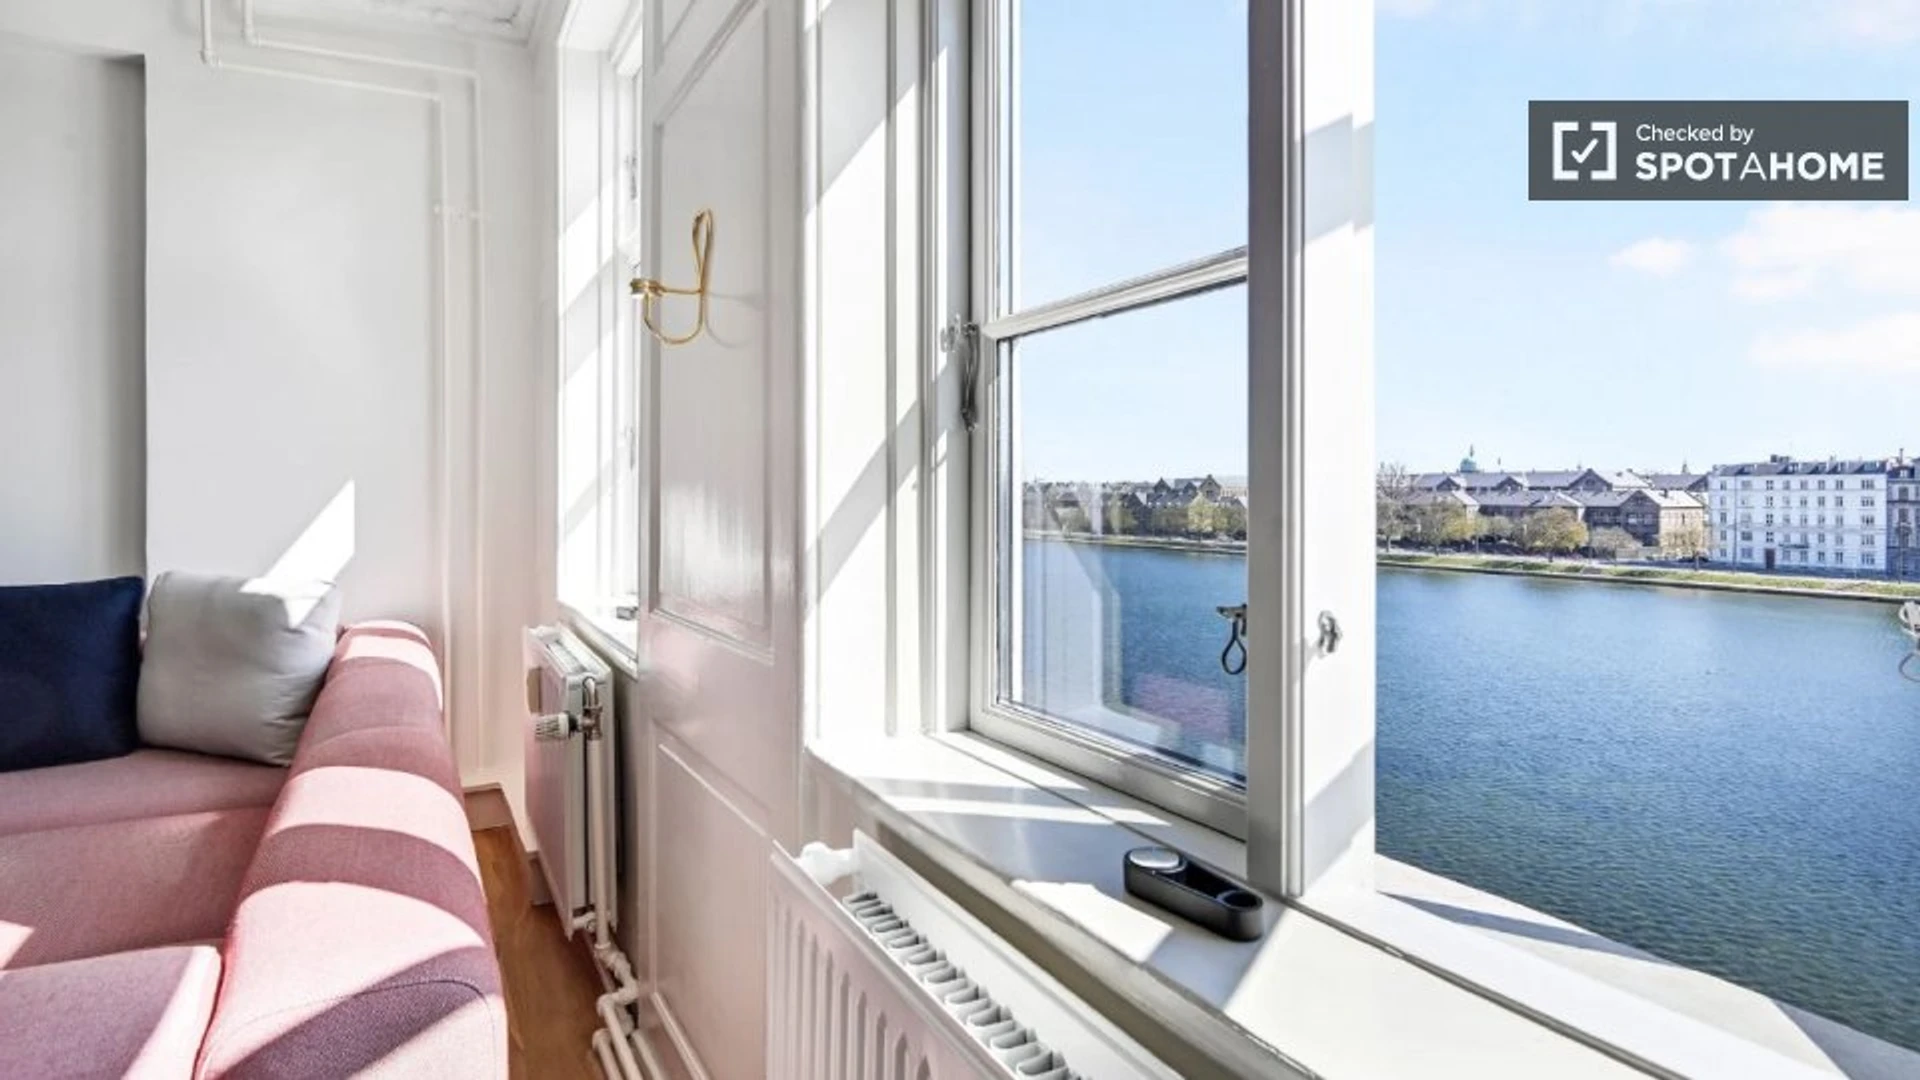 Renting rooms by the month in Copenhagen